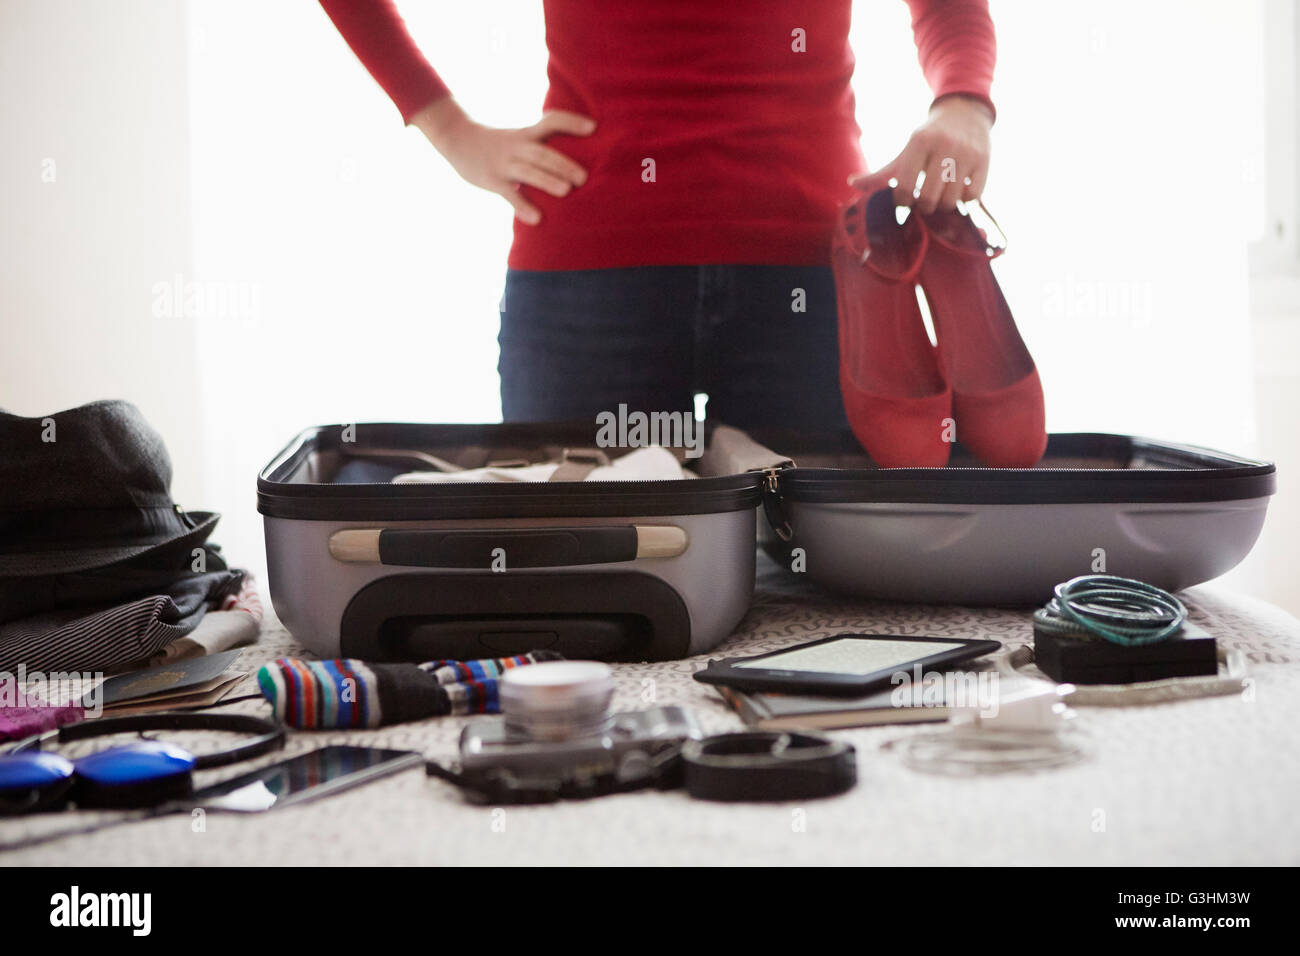 Woman packing suitcase, holding shoes, mid section Stock Photo